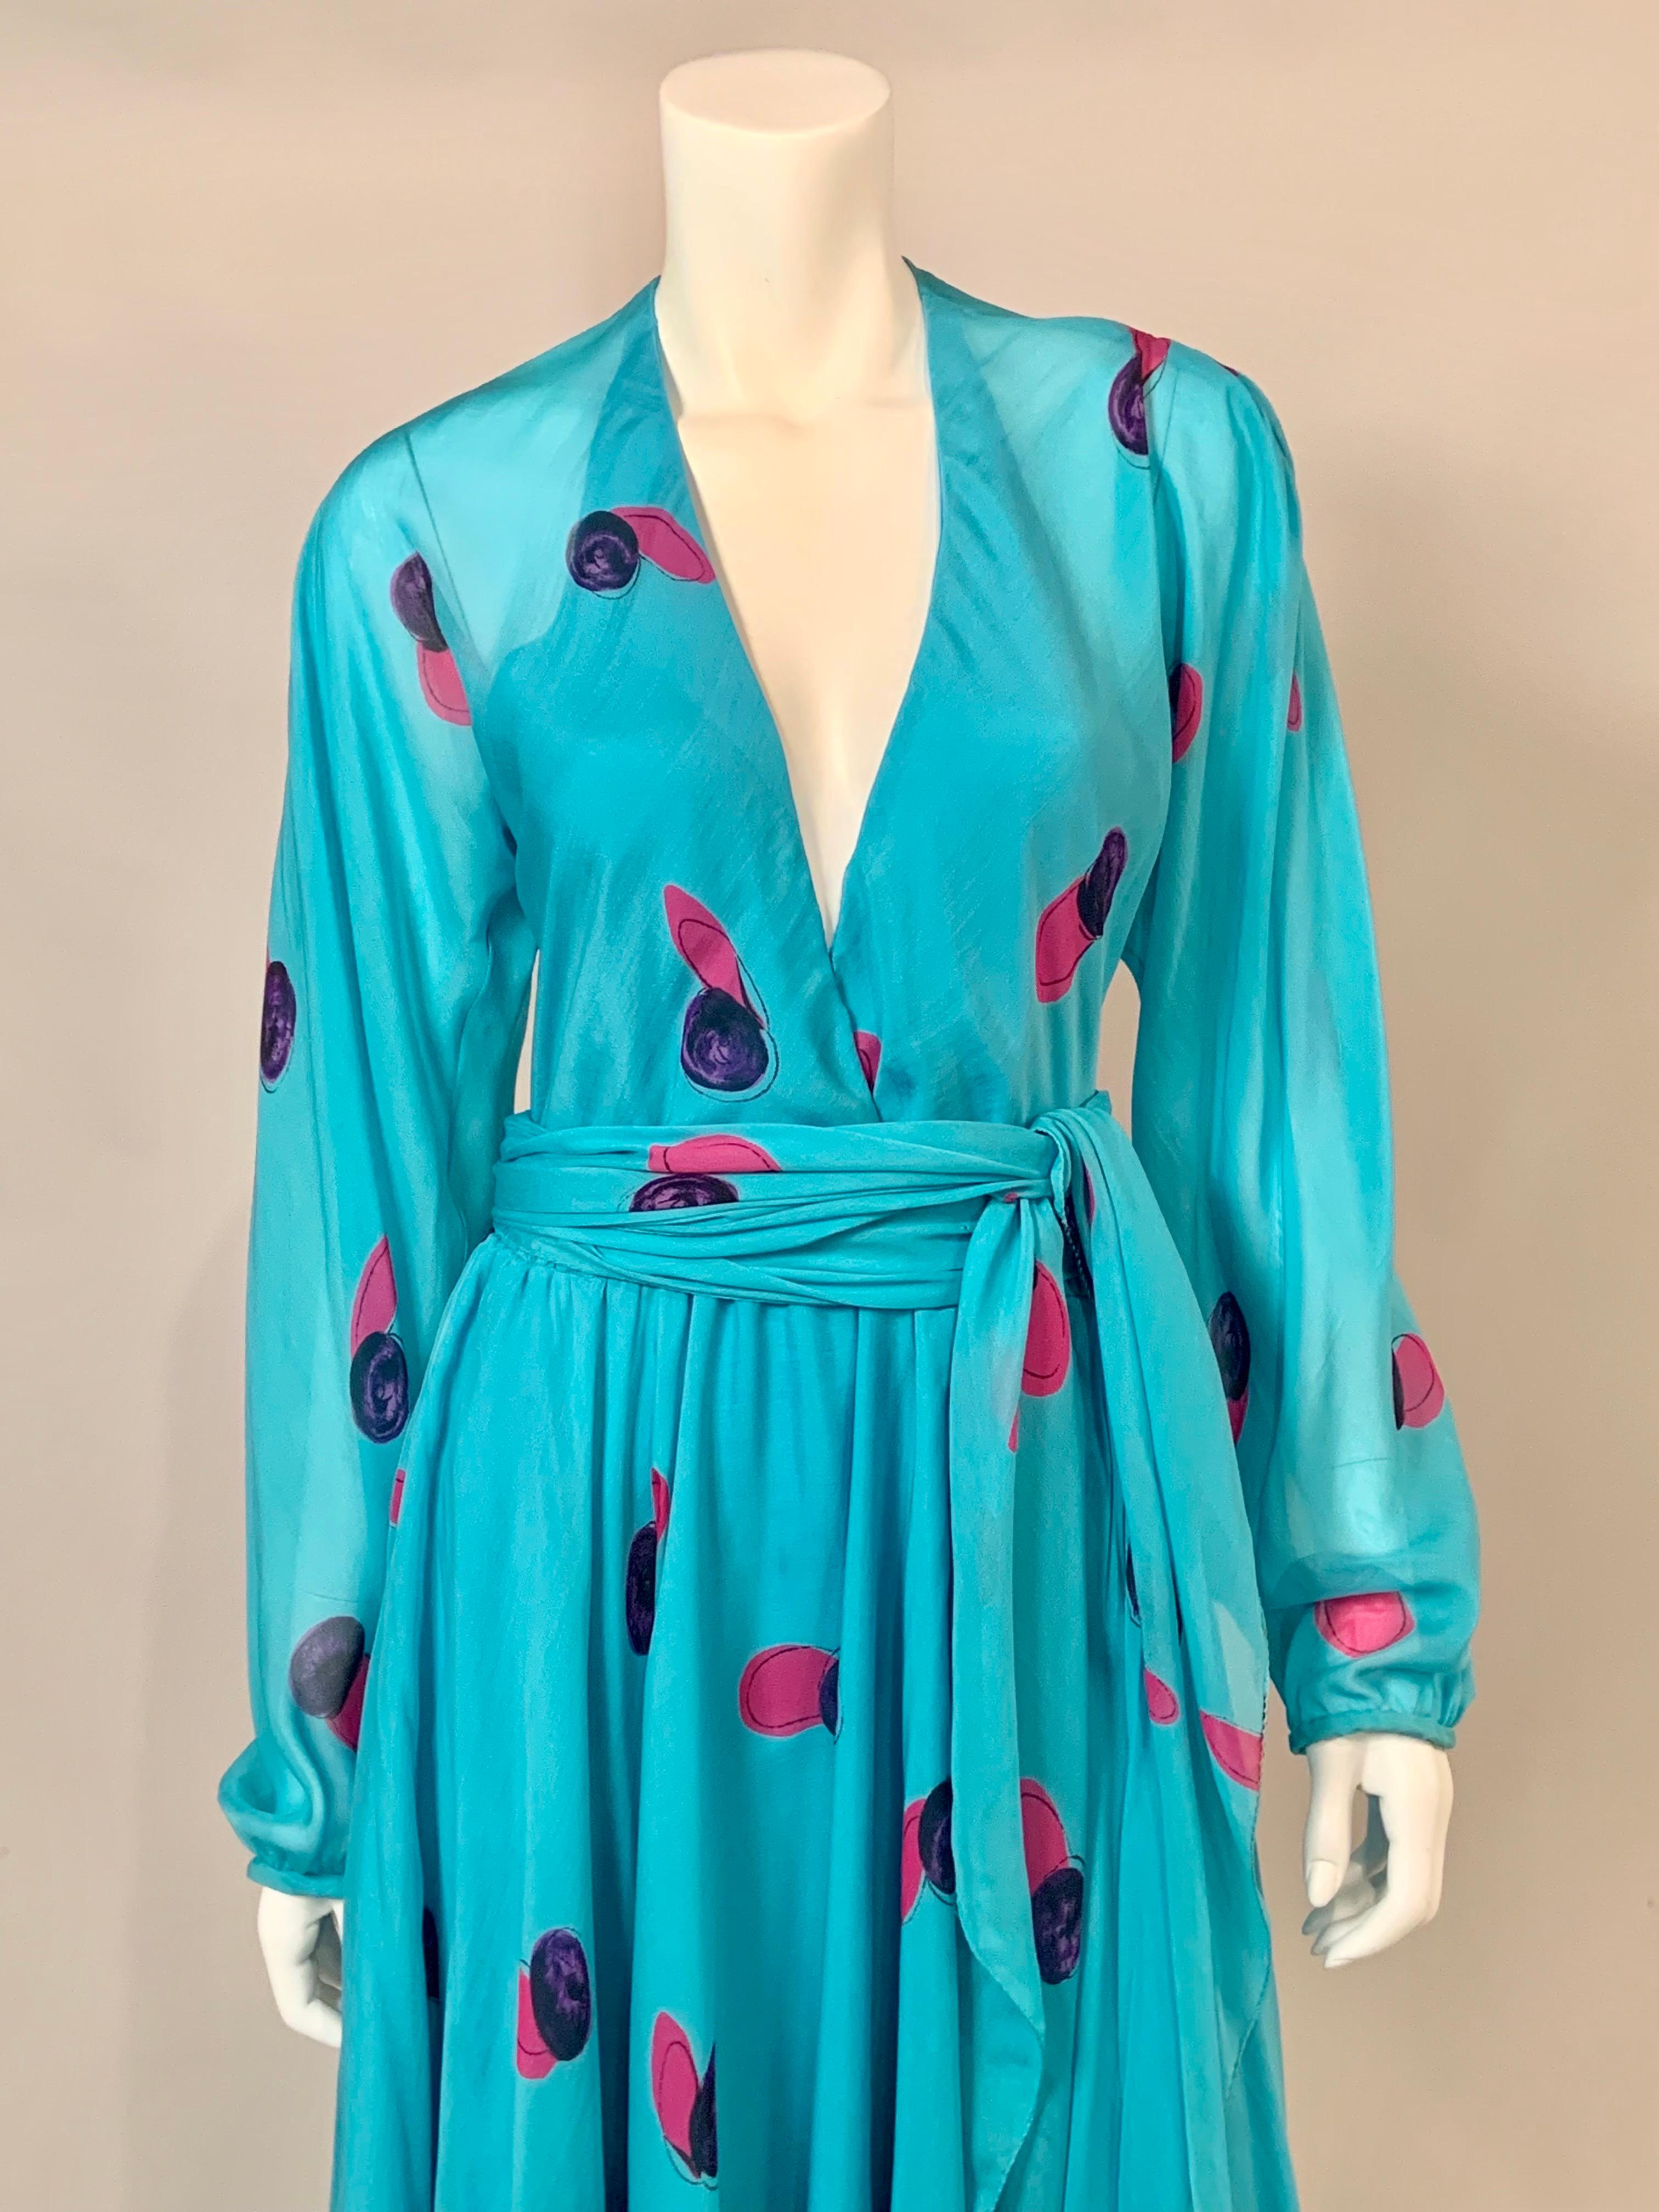 A gorgeous turquoise blue silk chiffon from Halston is printed with circular designs in magenta and purple.  The dress has a low V shaped neckline, long sleeves, a flowing skirt and a long matching sash belt.  The bodice is lined in the front and